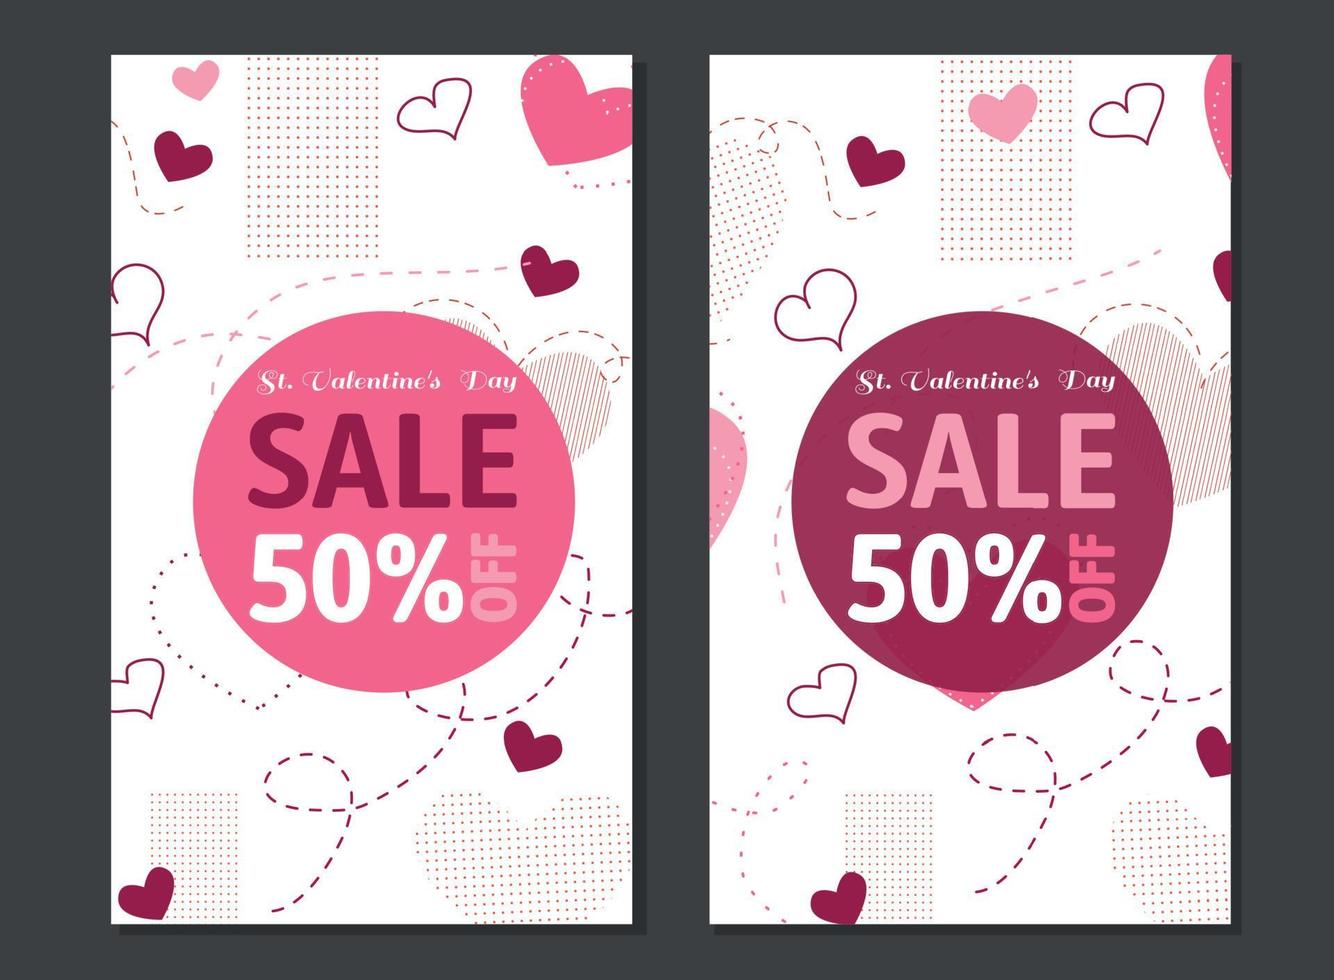 A banner for Valentine's Day. vector